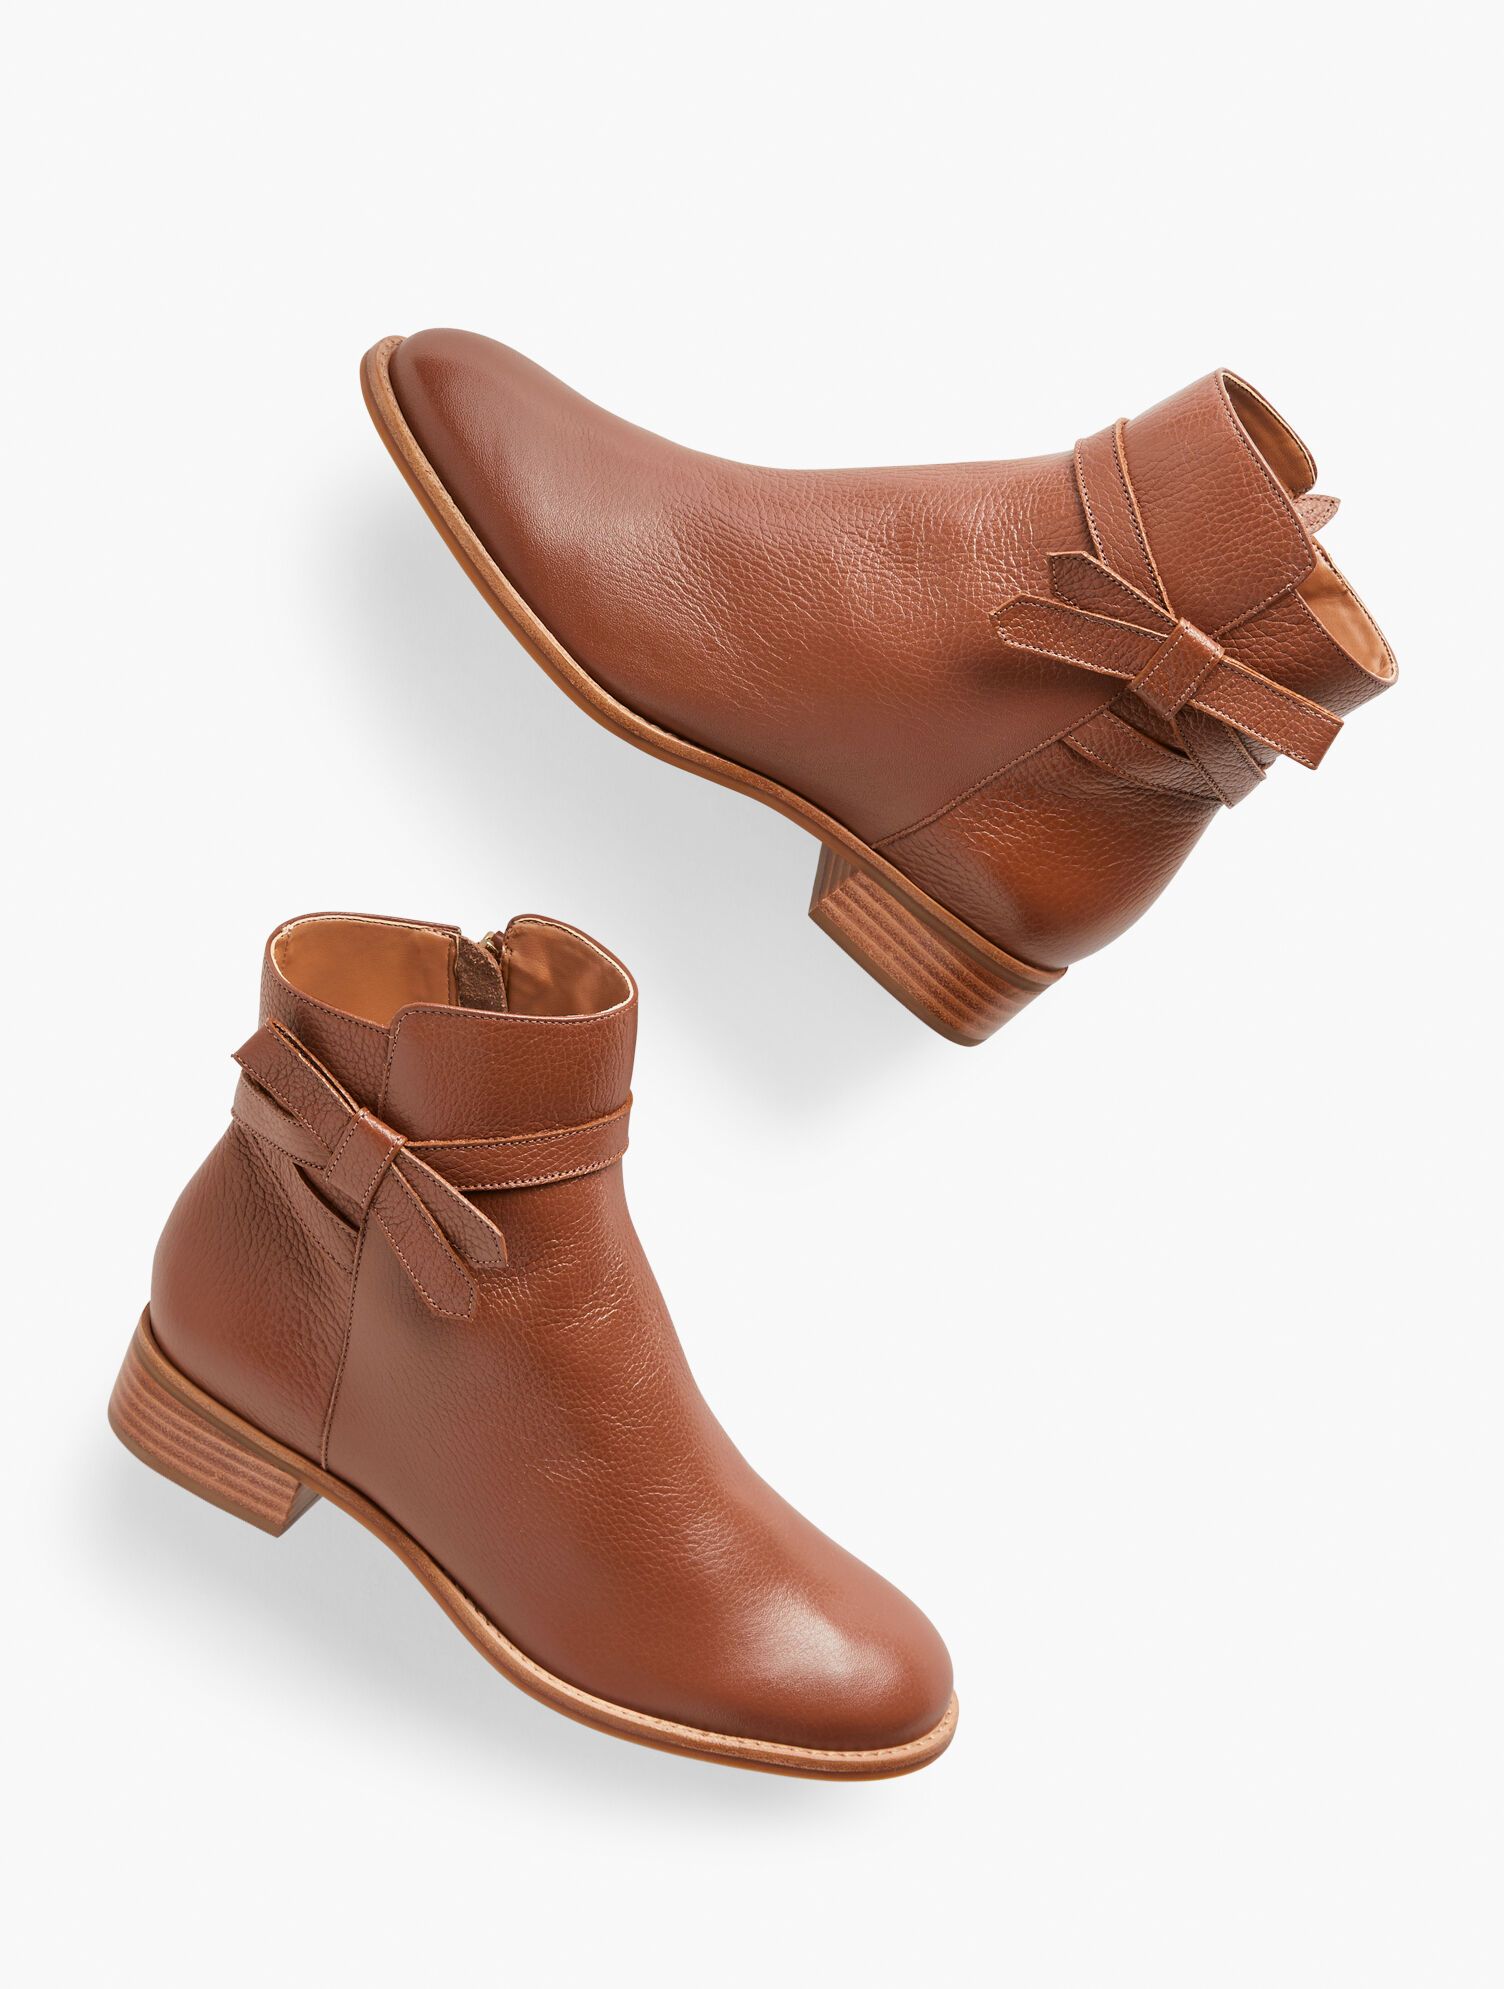 Tish Tie Soft Pebble Ankle Boot | Talbots